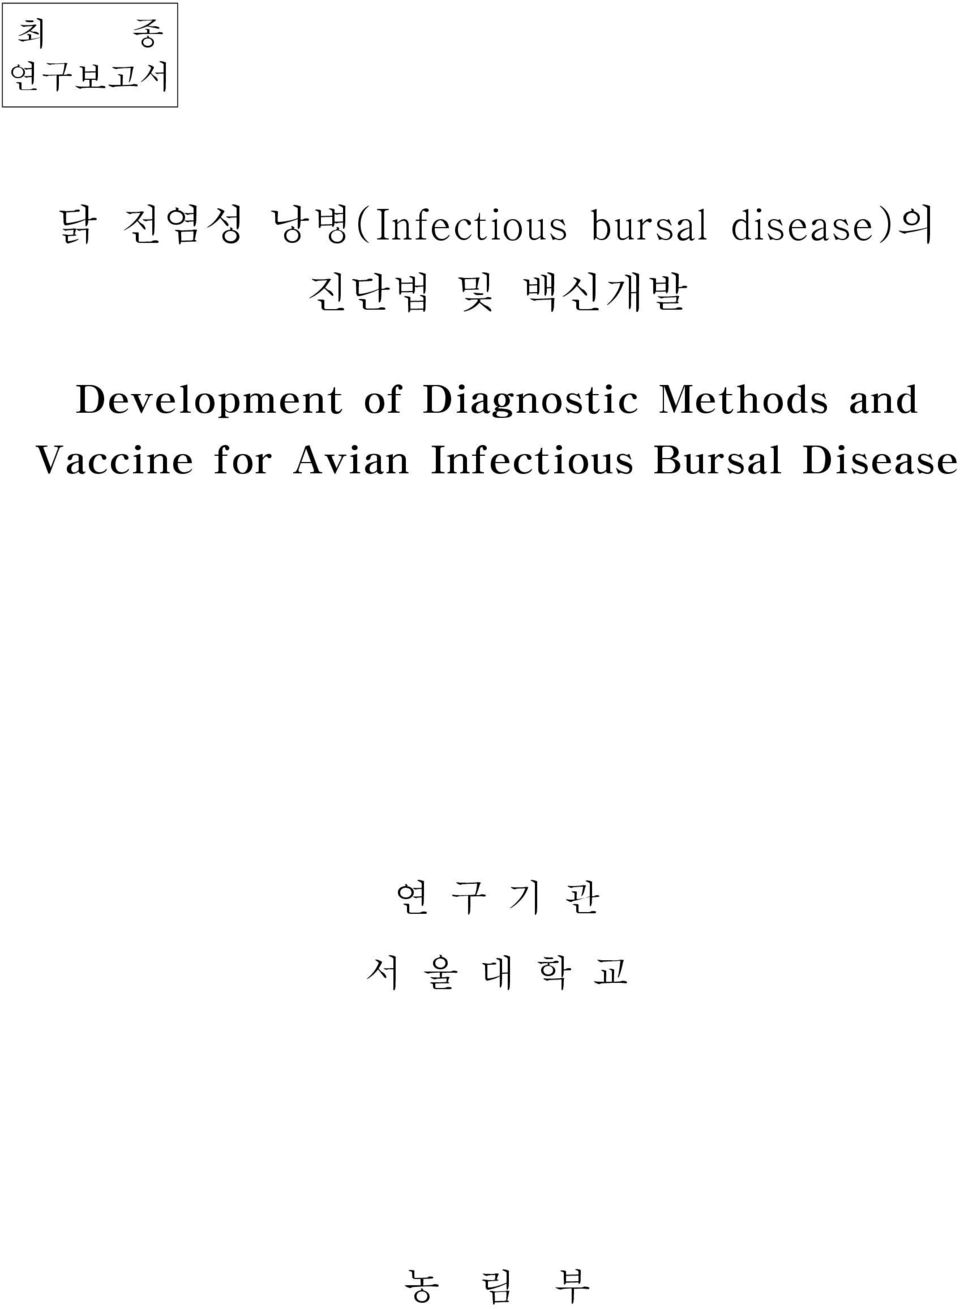 Diagnostic Methods and Vaccine for Avian